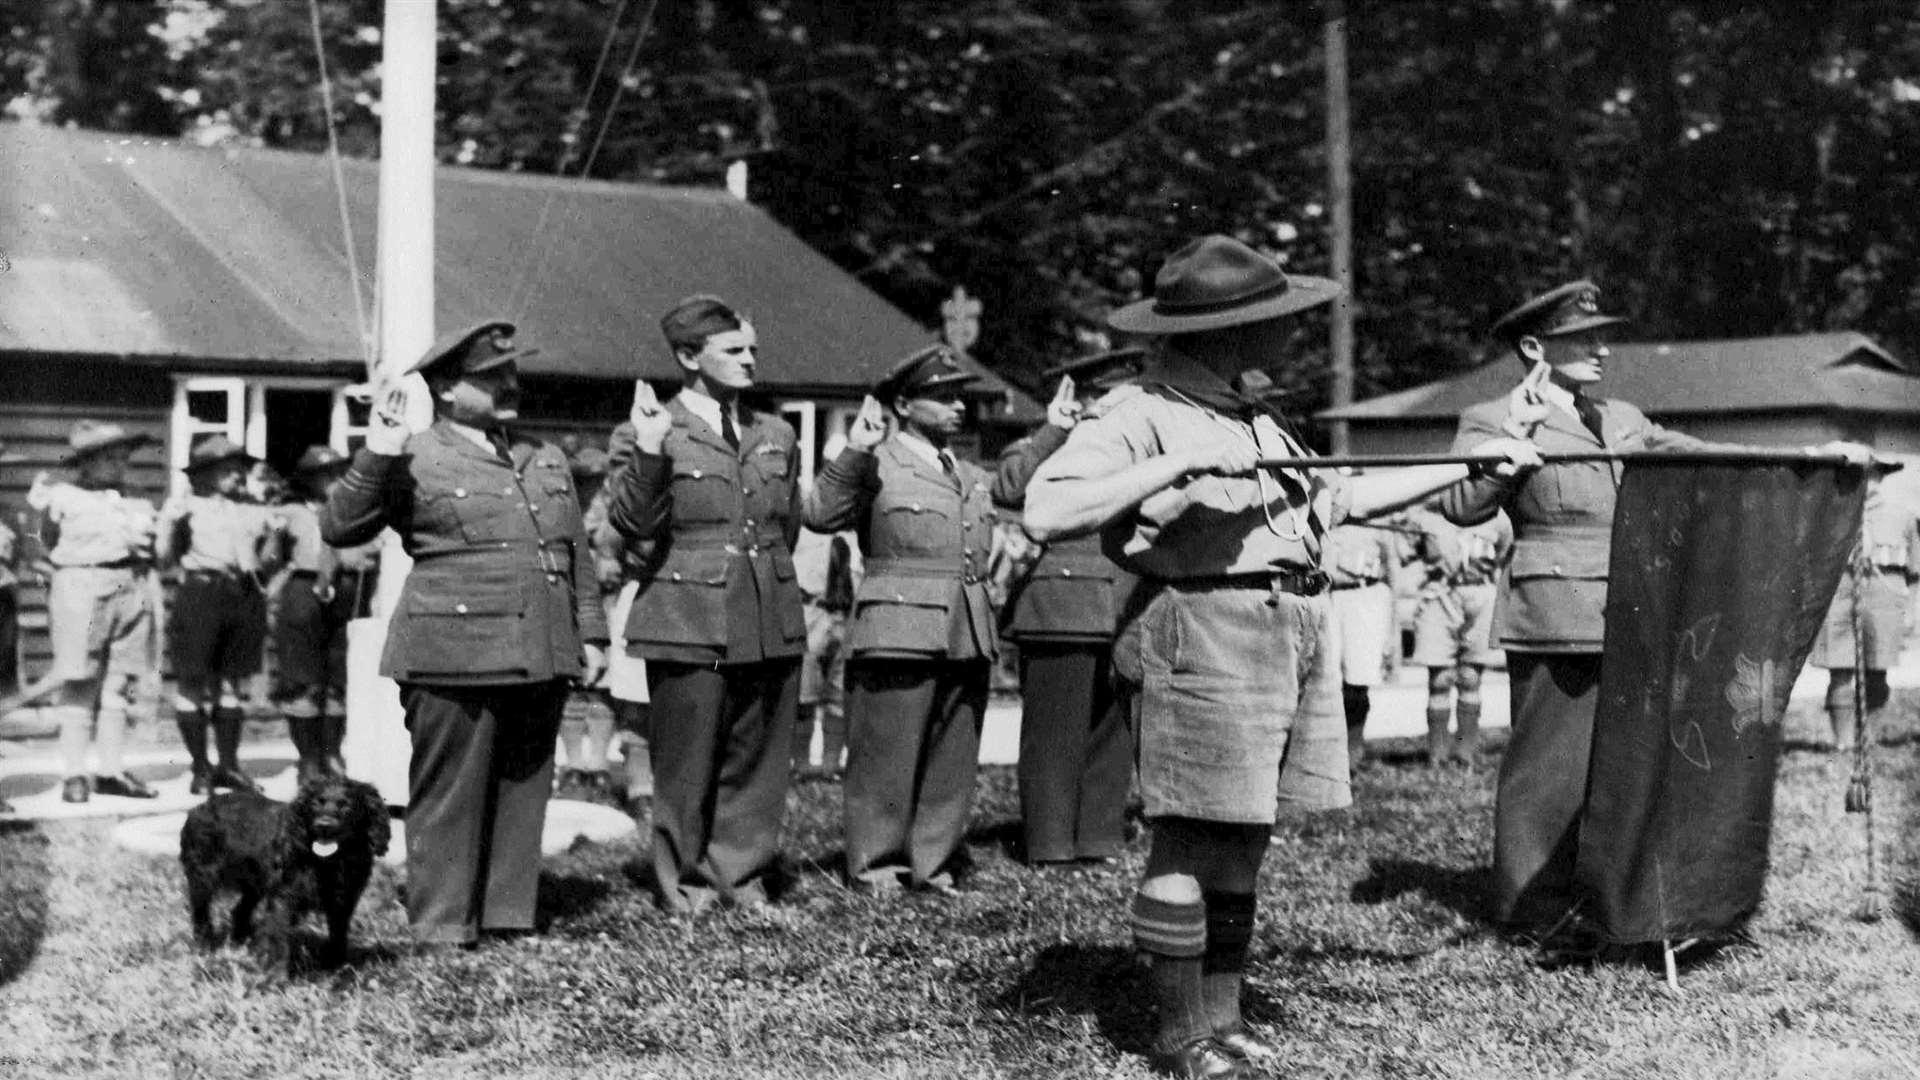 Guy Gibson being sworn in as a Venture Scout with the Tovil Scout Group, 1943. Courtesy of Tovil Scout Group